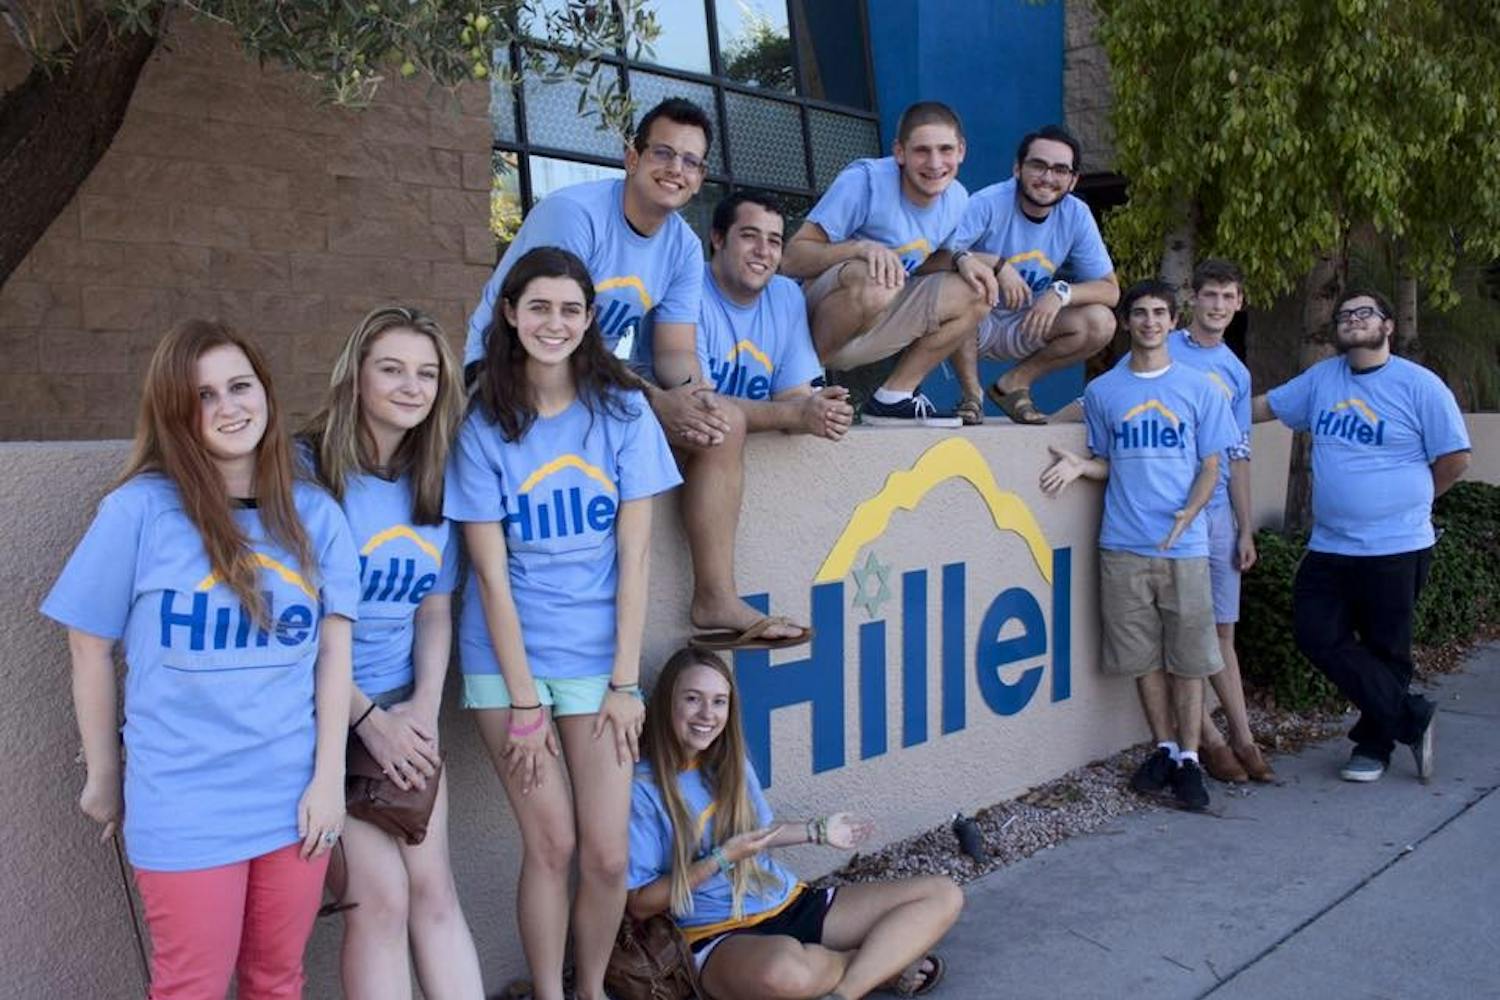 Students pose for a photo&nbsp;outside of Hillel together.